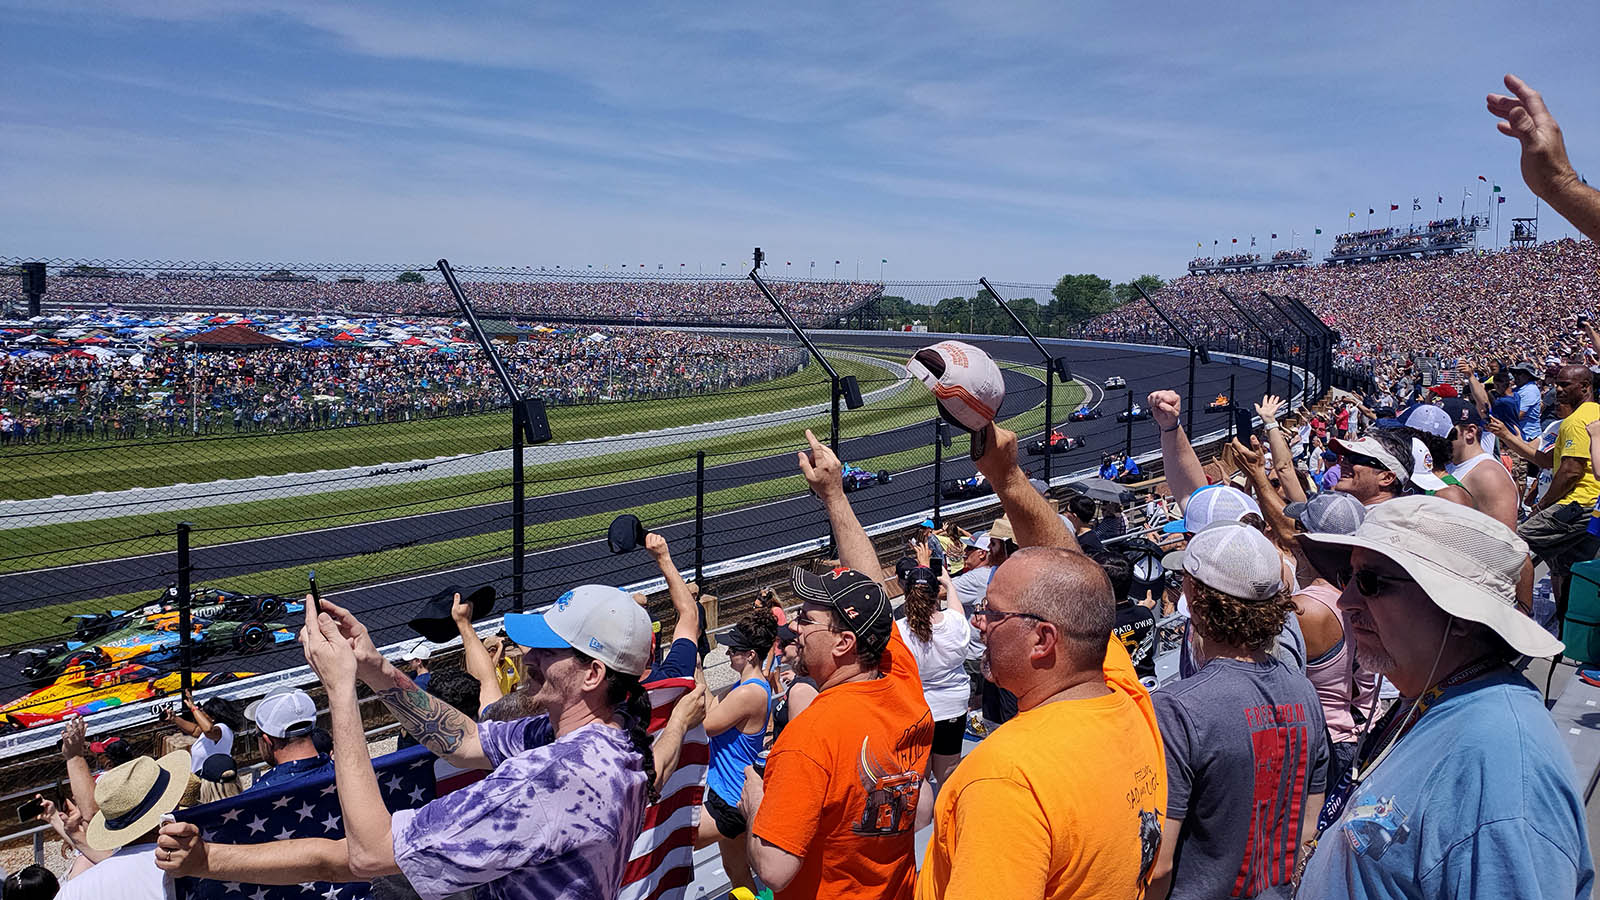 Planet Sport at Indy 500